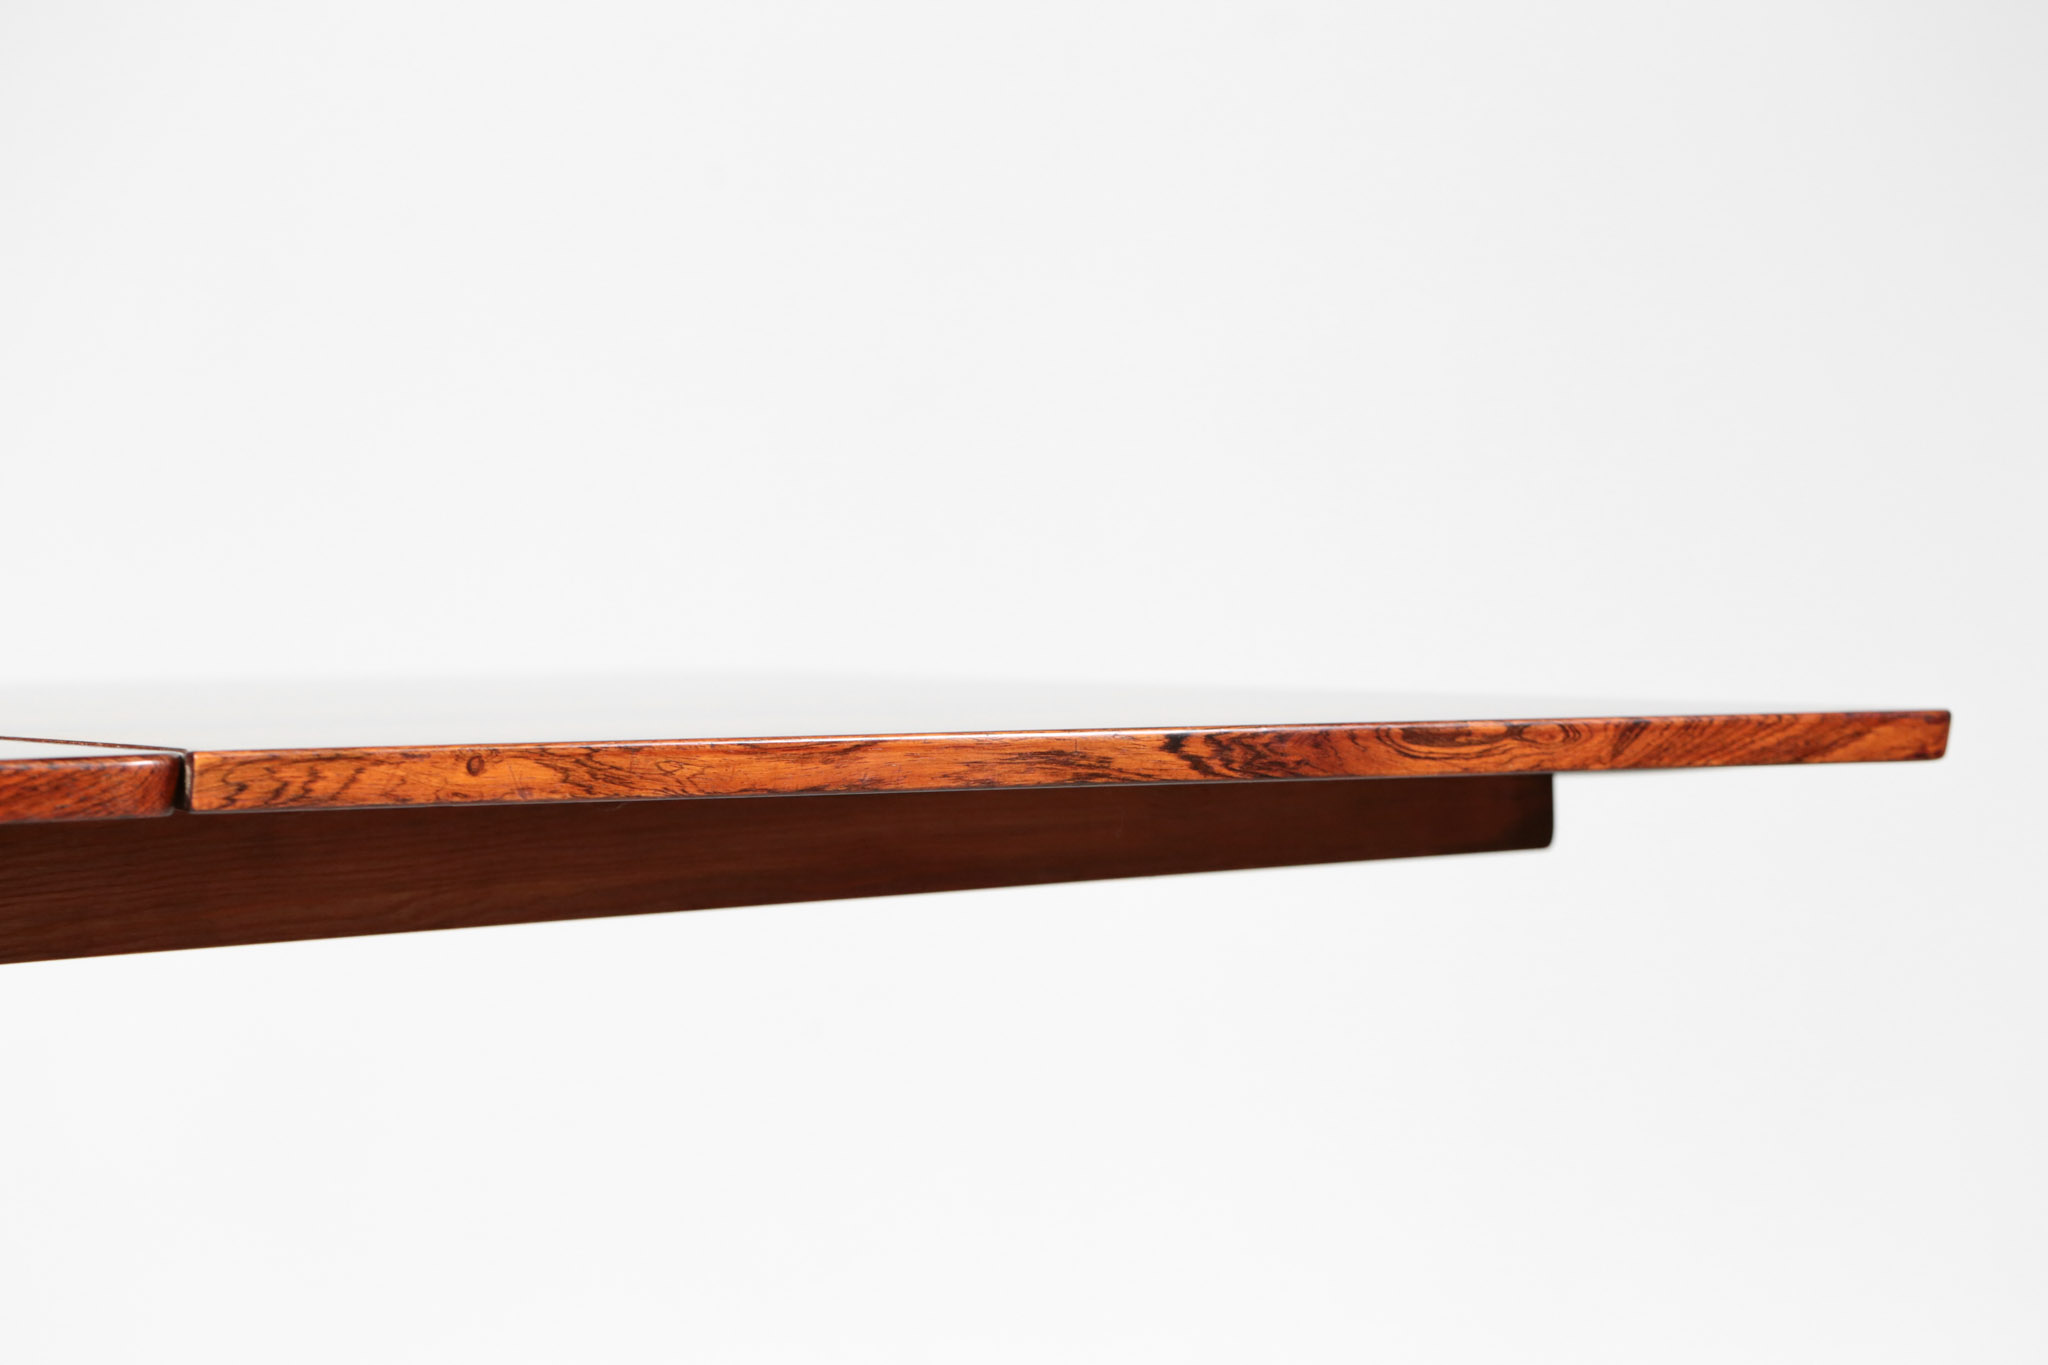 Voluntary A central tool that plays an important role Fore type Large Arne Vodder Dining Table Danish Design Rosewood – D292 – Danke Galerie